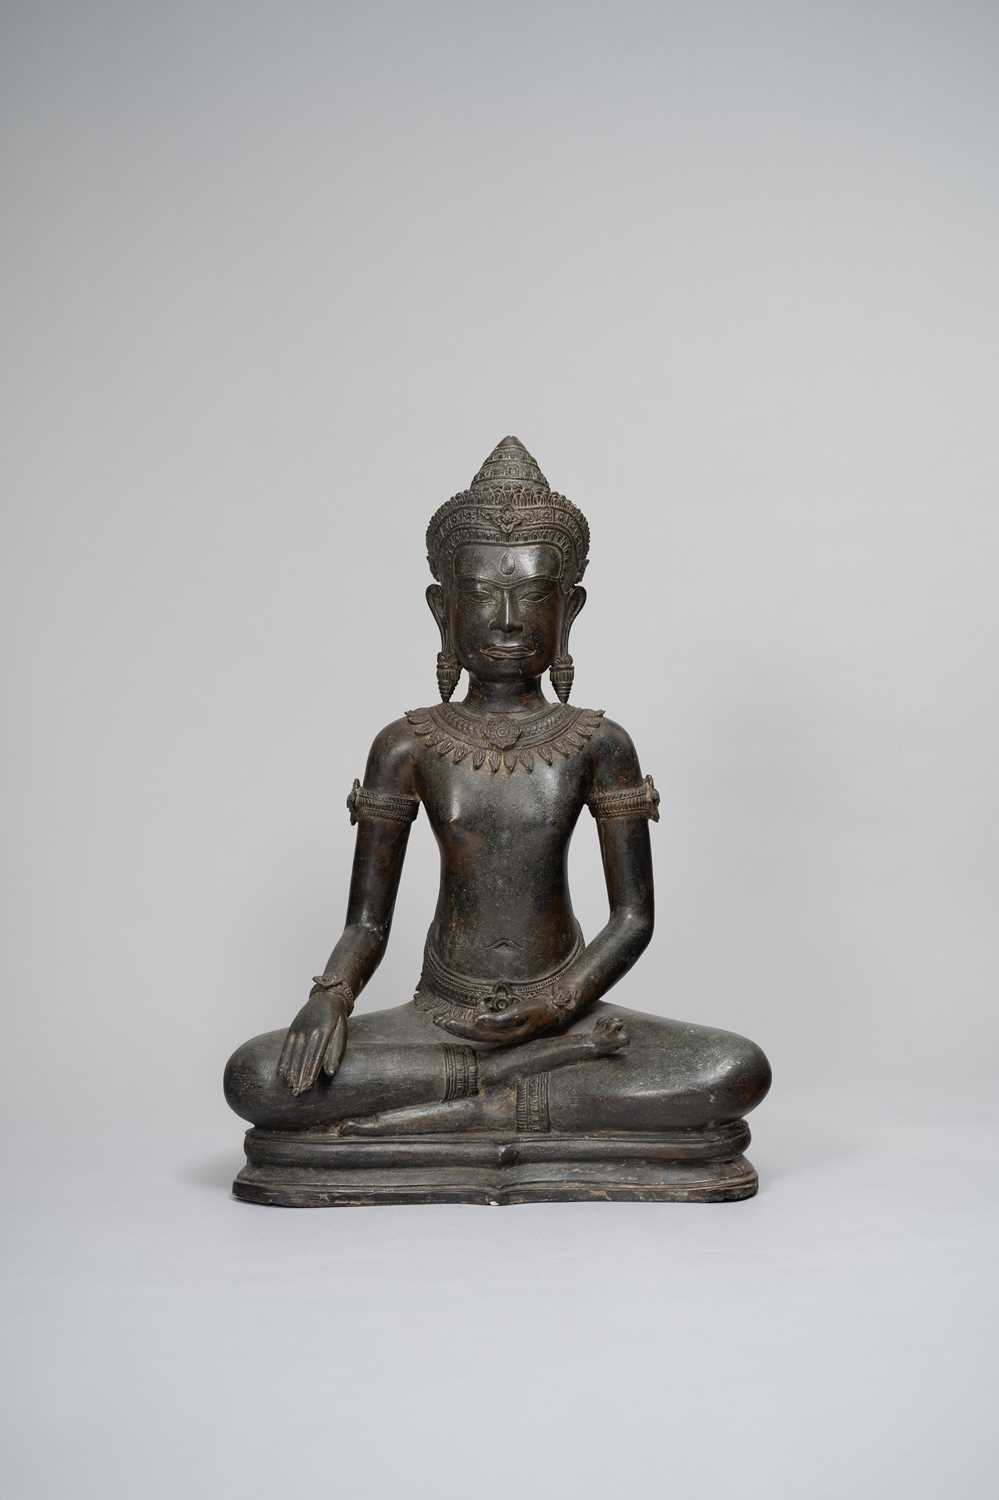 A THAI LOPBURI-STYLE BRONZE FIGURE OF BUDDHA 12TH CENTURY OR LATER Seated in dhyanasana on a plinth,